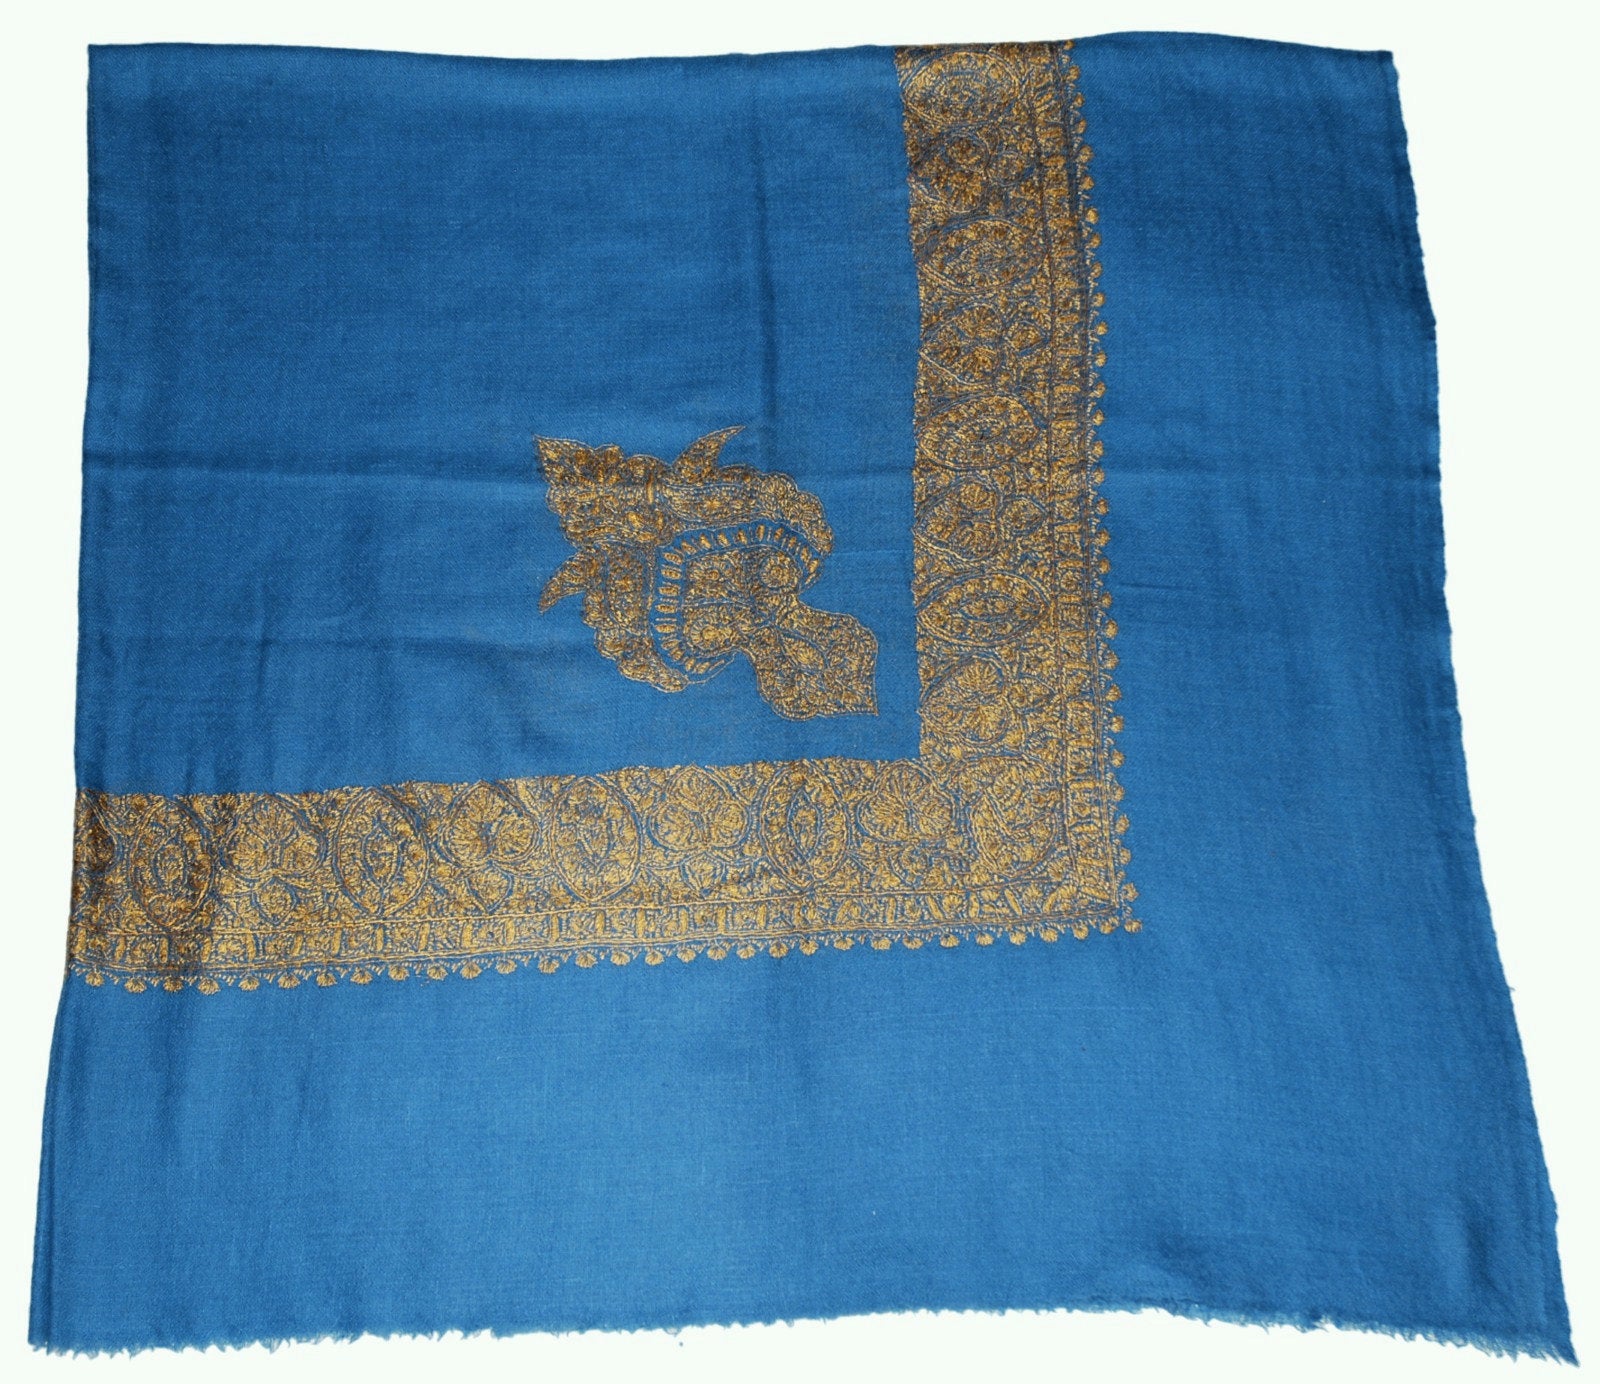 Gold on Teal Arab Scarf Shemagh, Pashmina "Cashmere" Embroidered Handloom Shawl #PRM-402